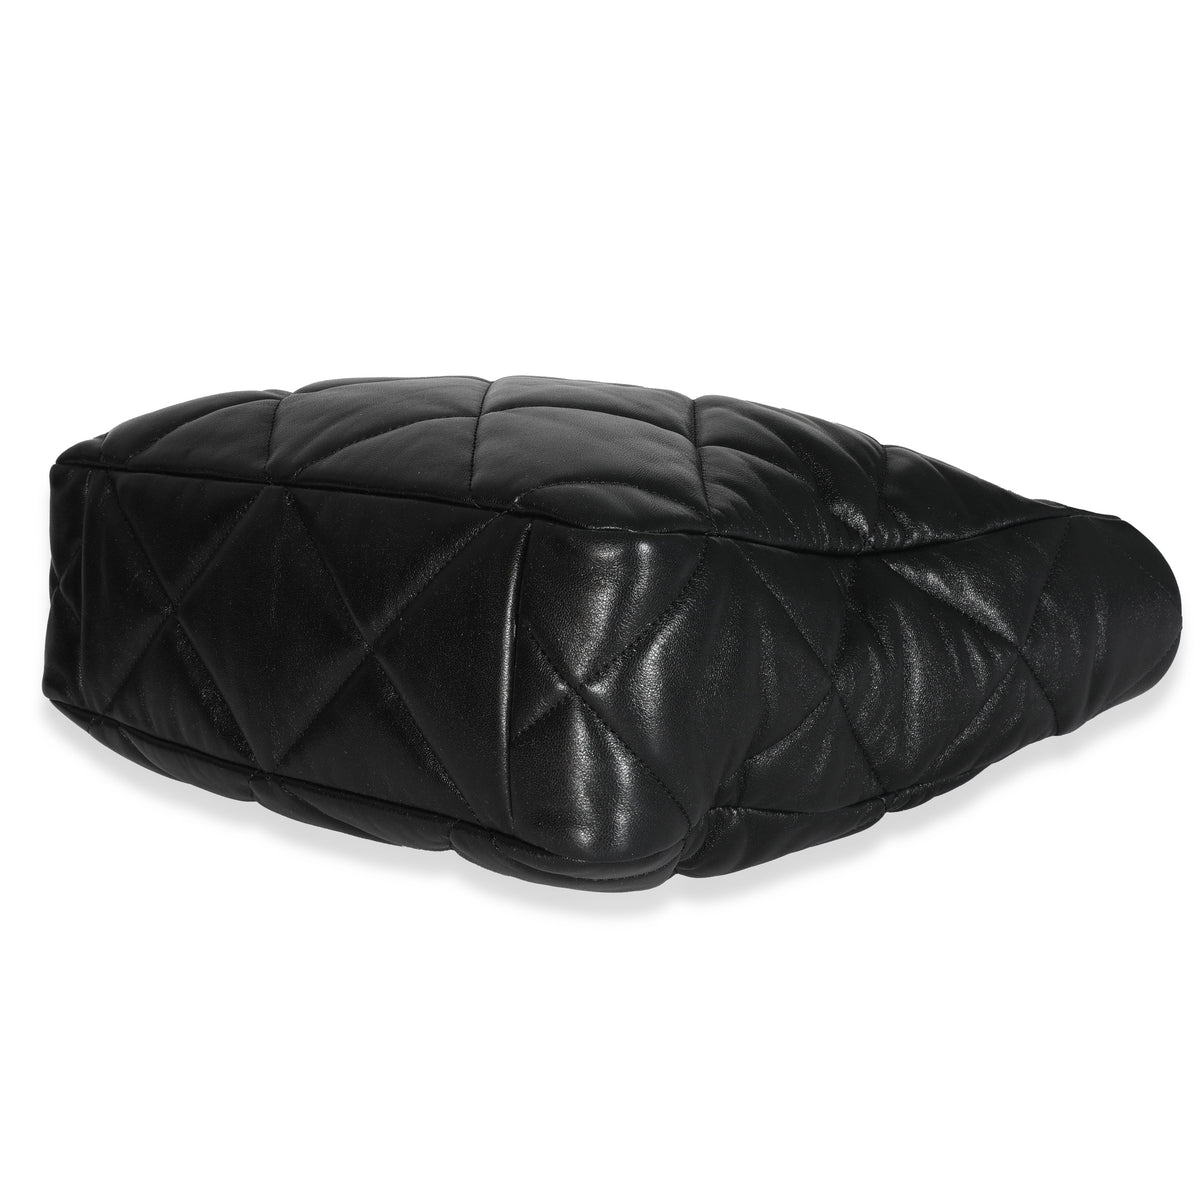 Chanel Black Lambskin Quilted Chanel 19 Shopping Bag